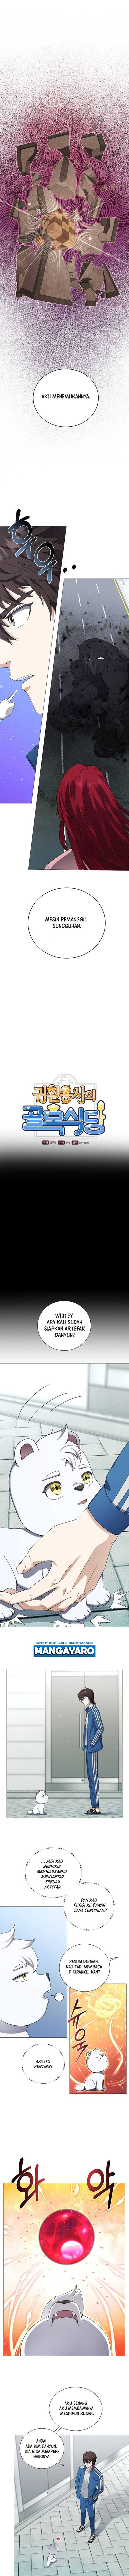 The Returning Warrior’s Alley Restaurant Chapter 54 Bahasa Indonesia